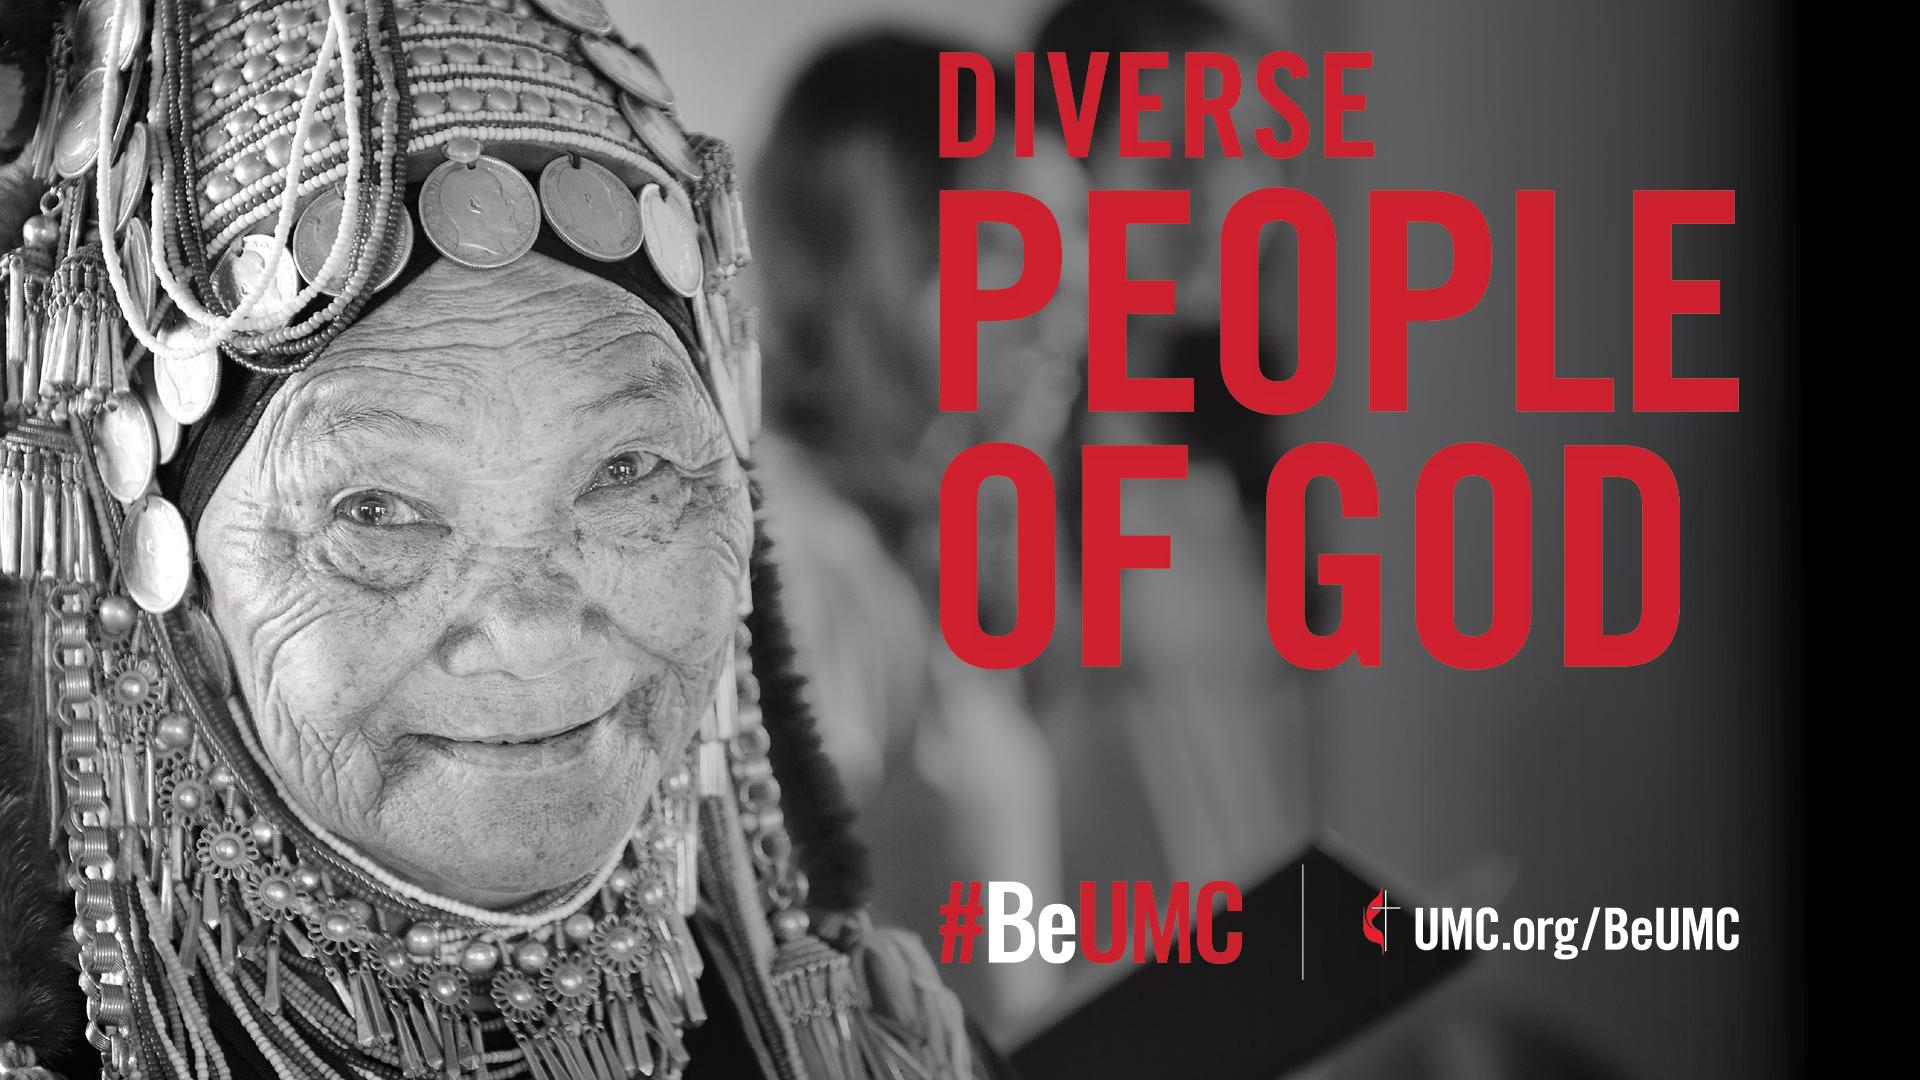 A Prayer for the Diverse People of God